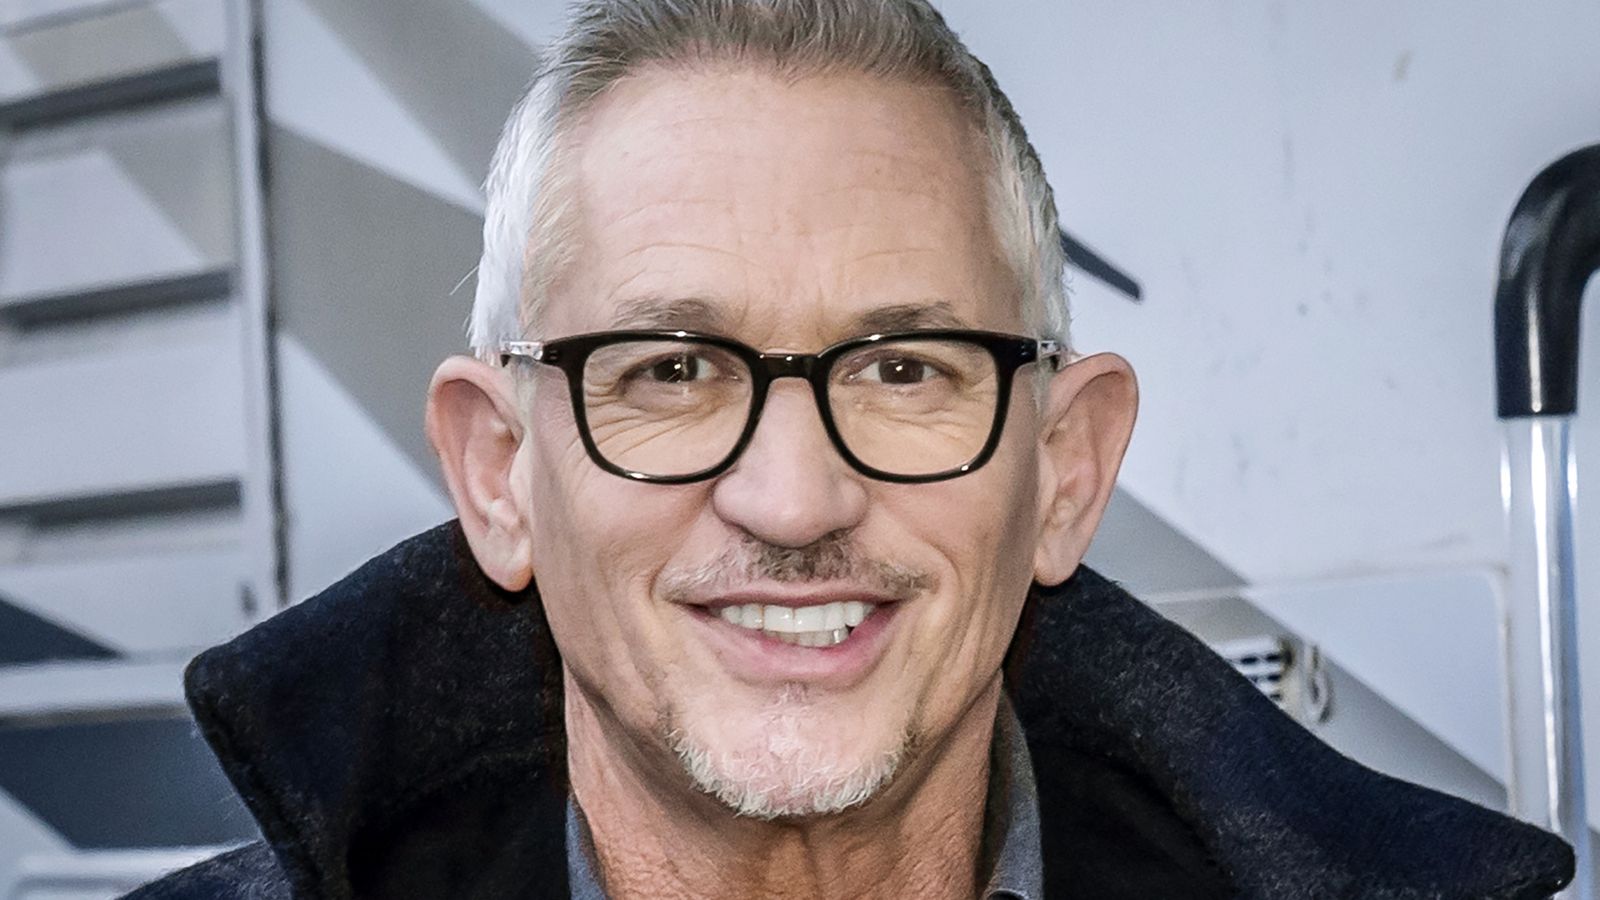 Gary Lineker stands by 'factually accurate' tweet on government asylum seeker policy